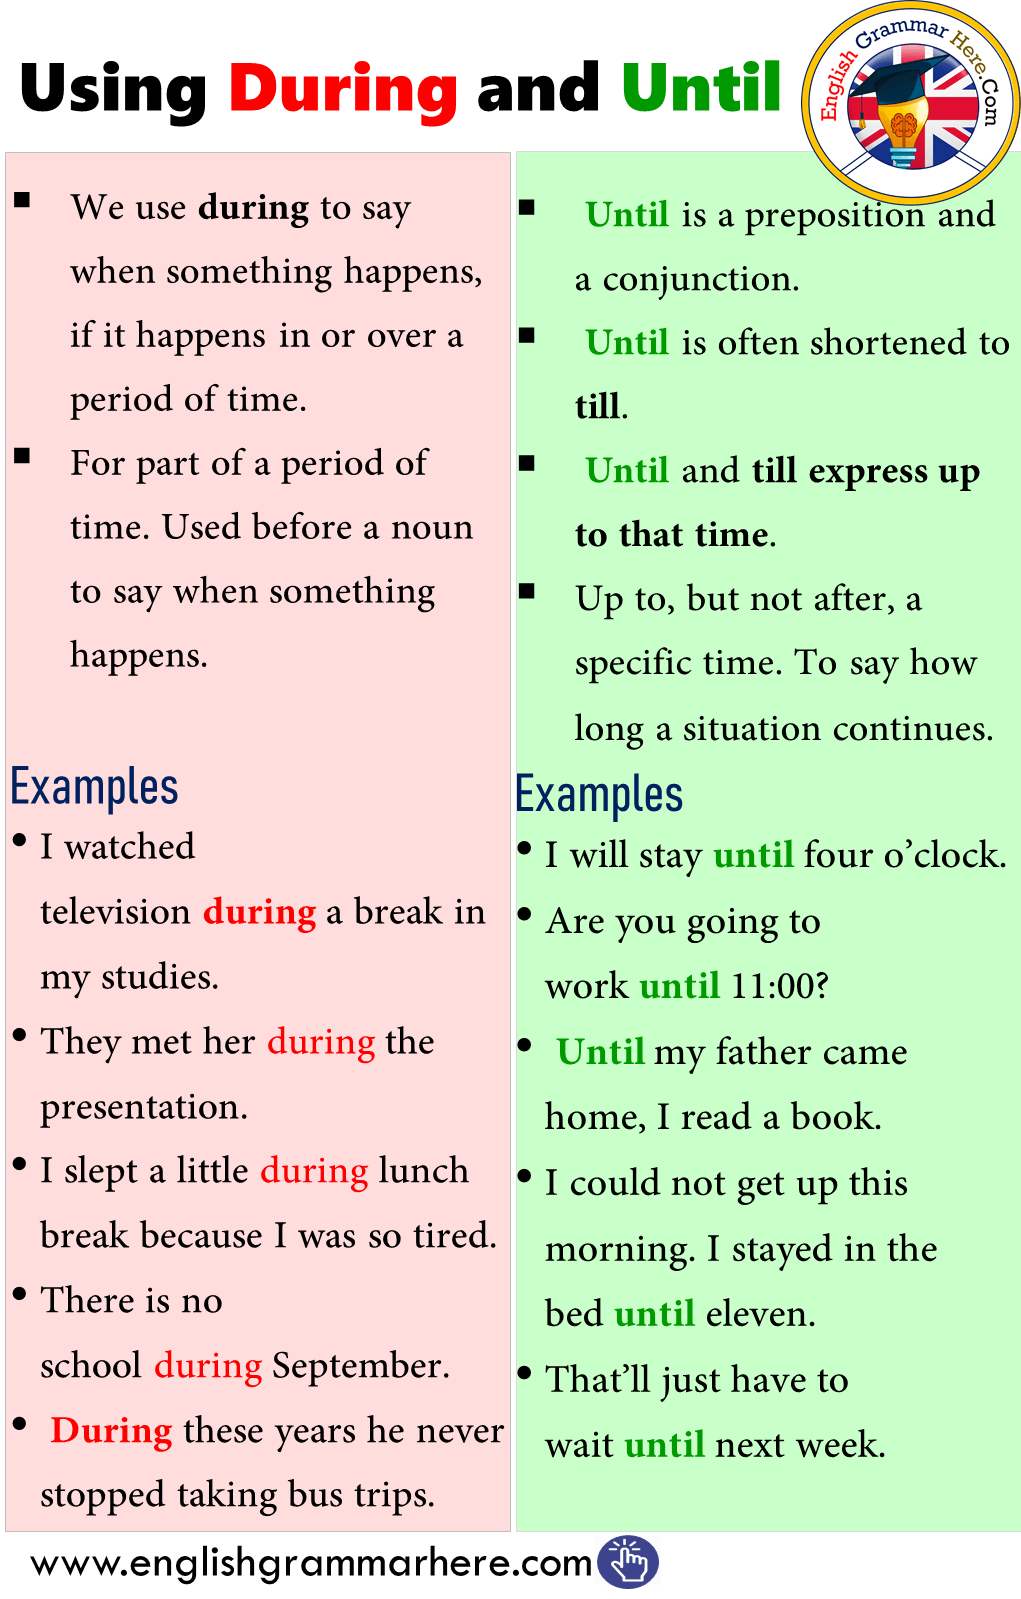 Using During and Until in English